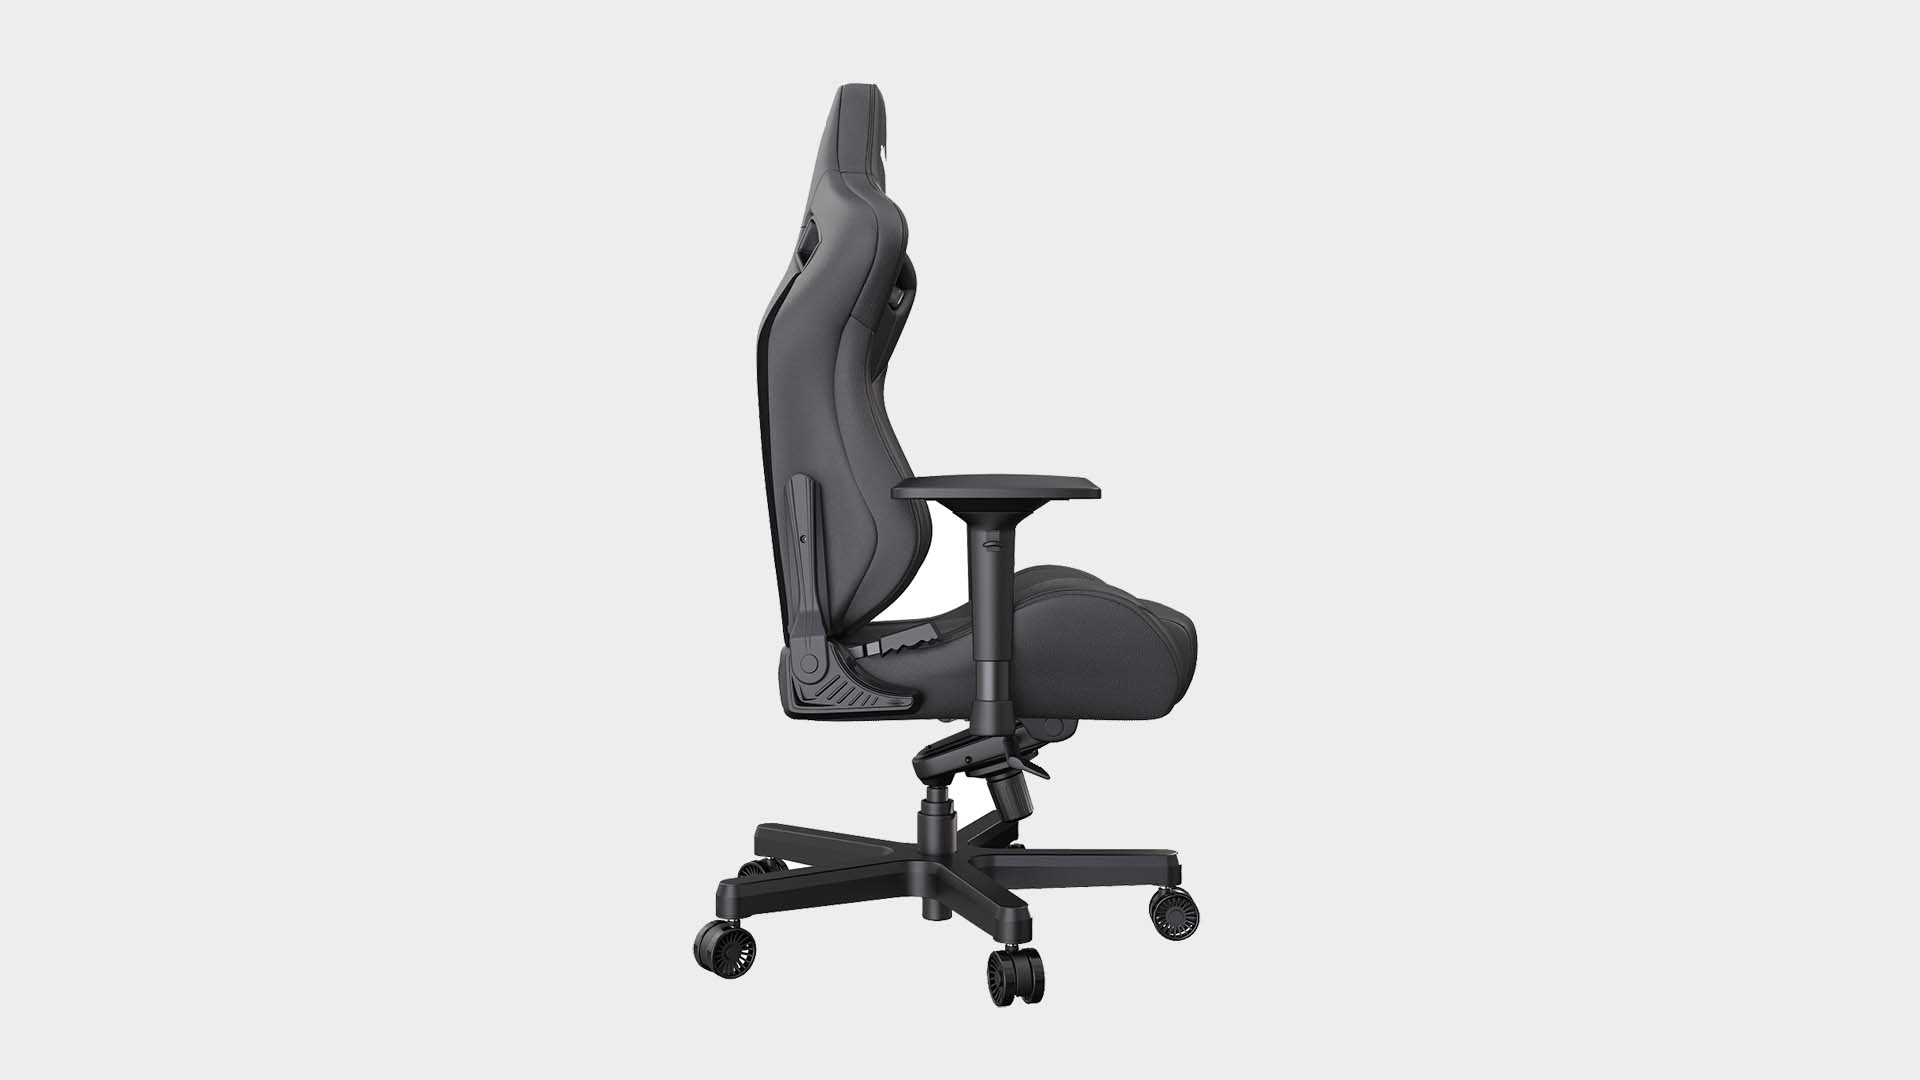 Andaseat Kaiser II gaming chair from various angles on a grey background